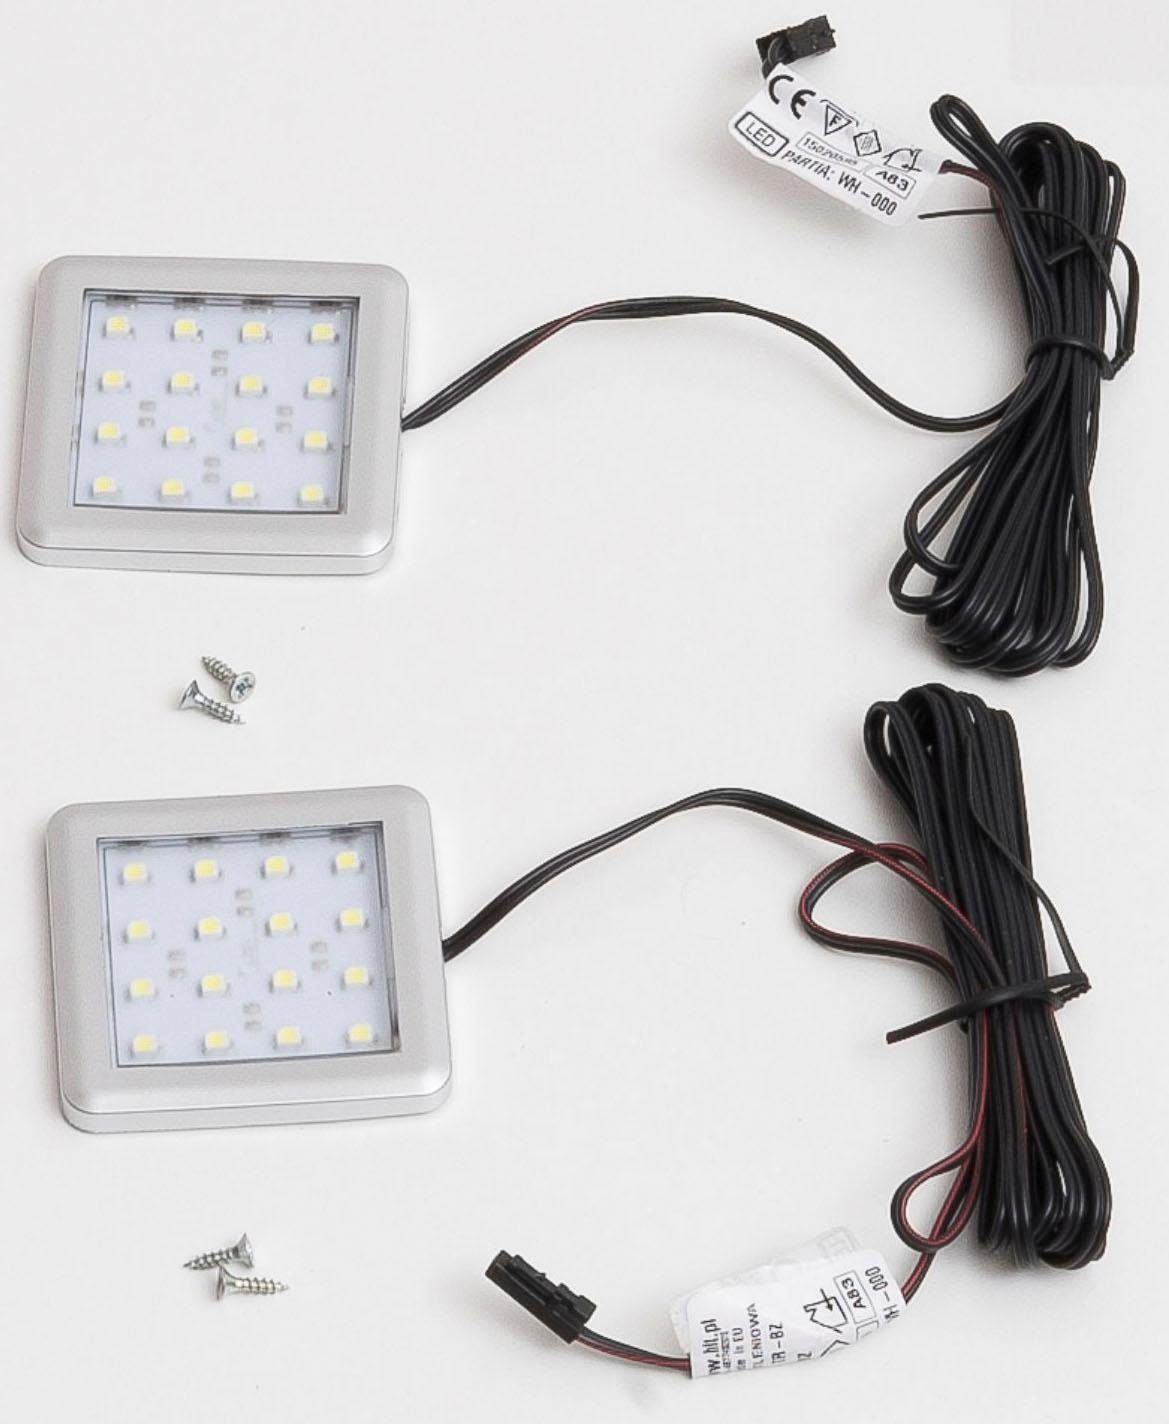 set one LED set Einbauleuchte by Musterring TACOMA, fest Musterring von integriert, LED one by